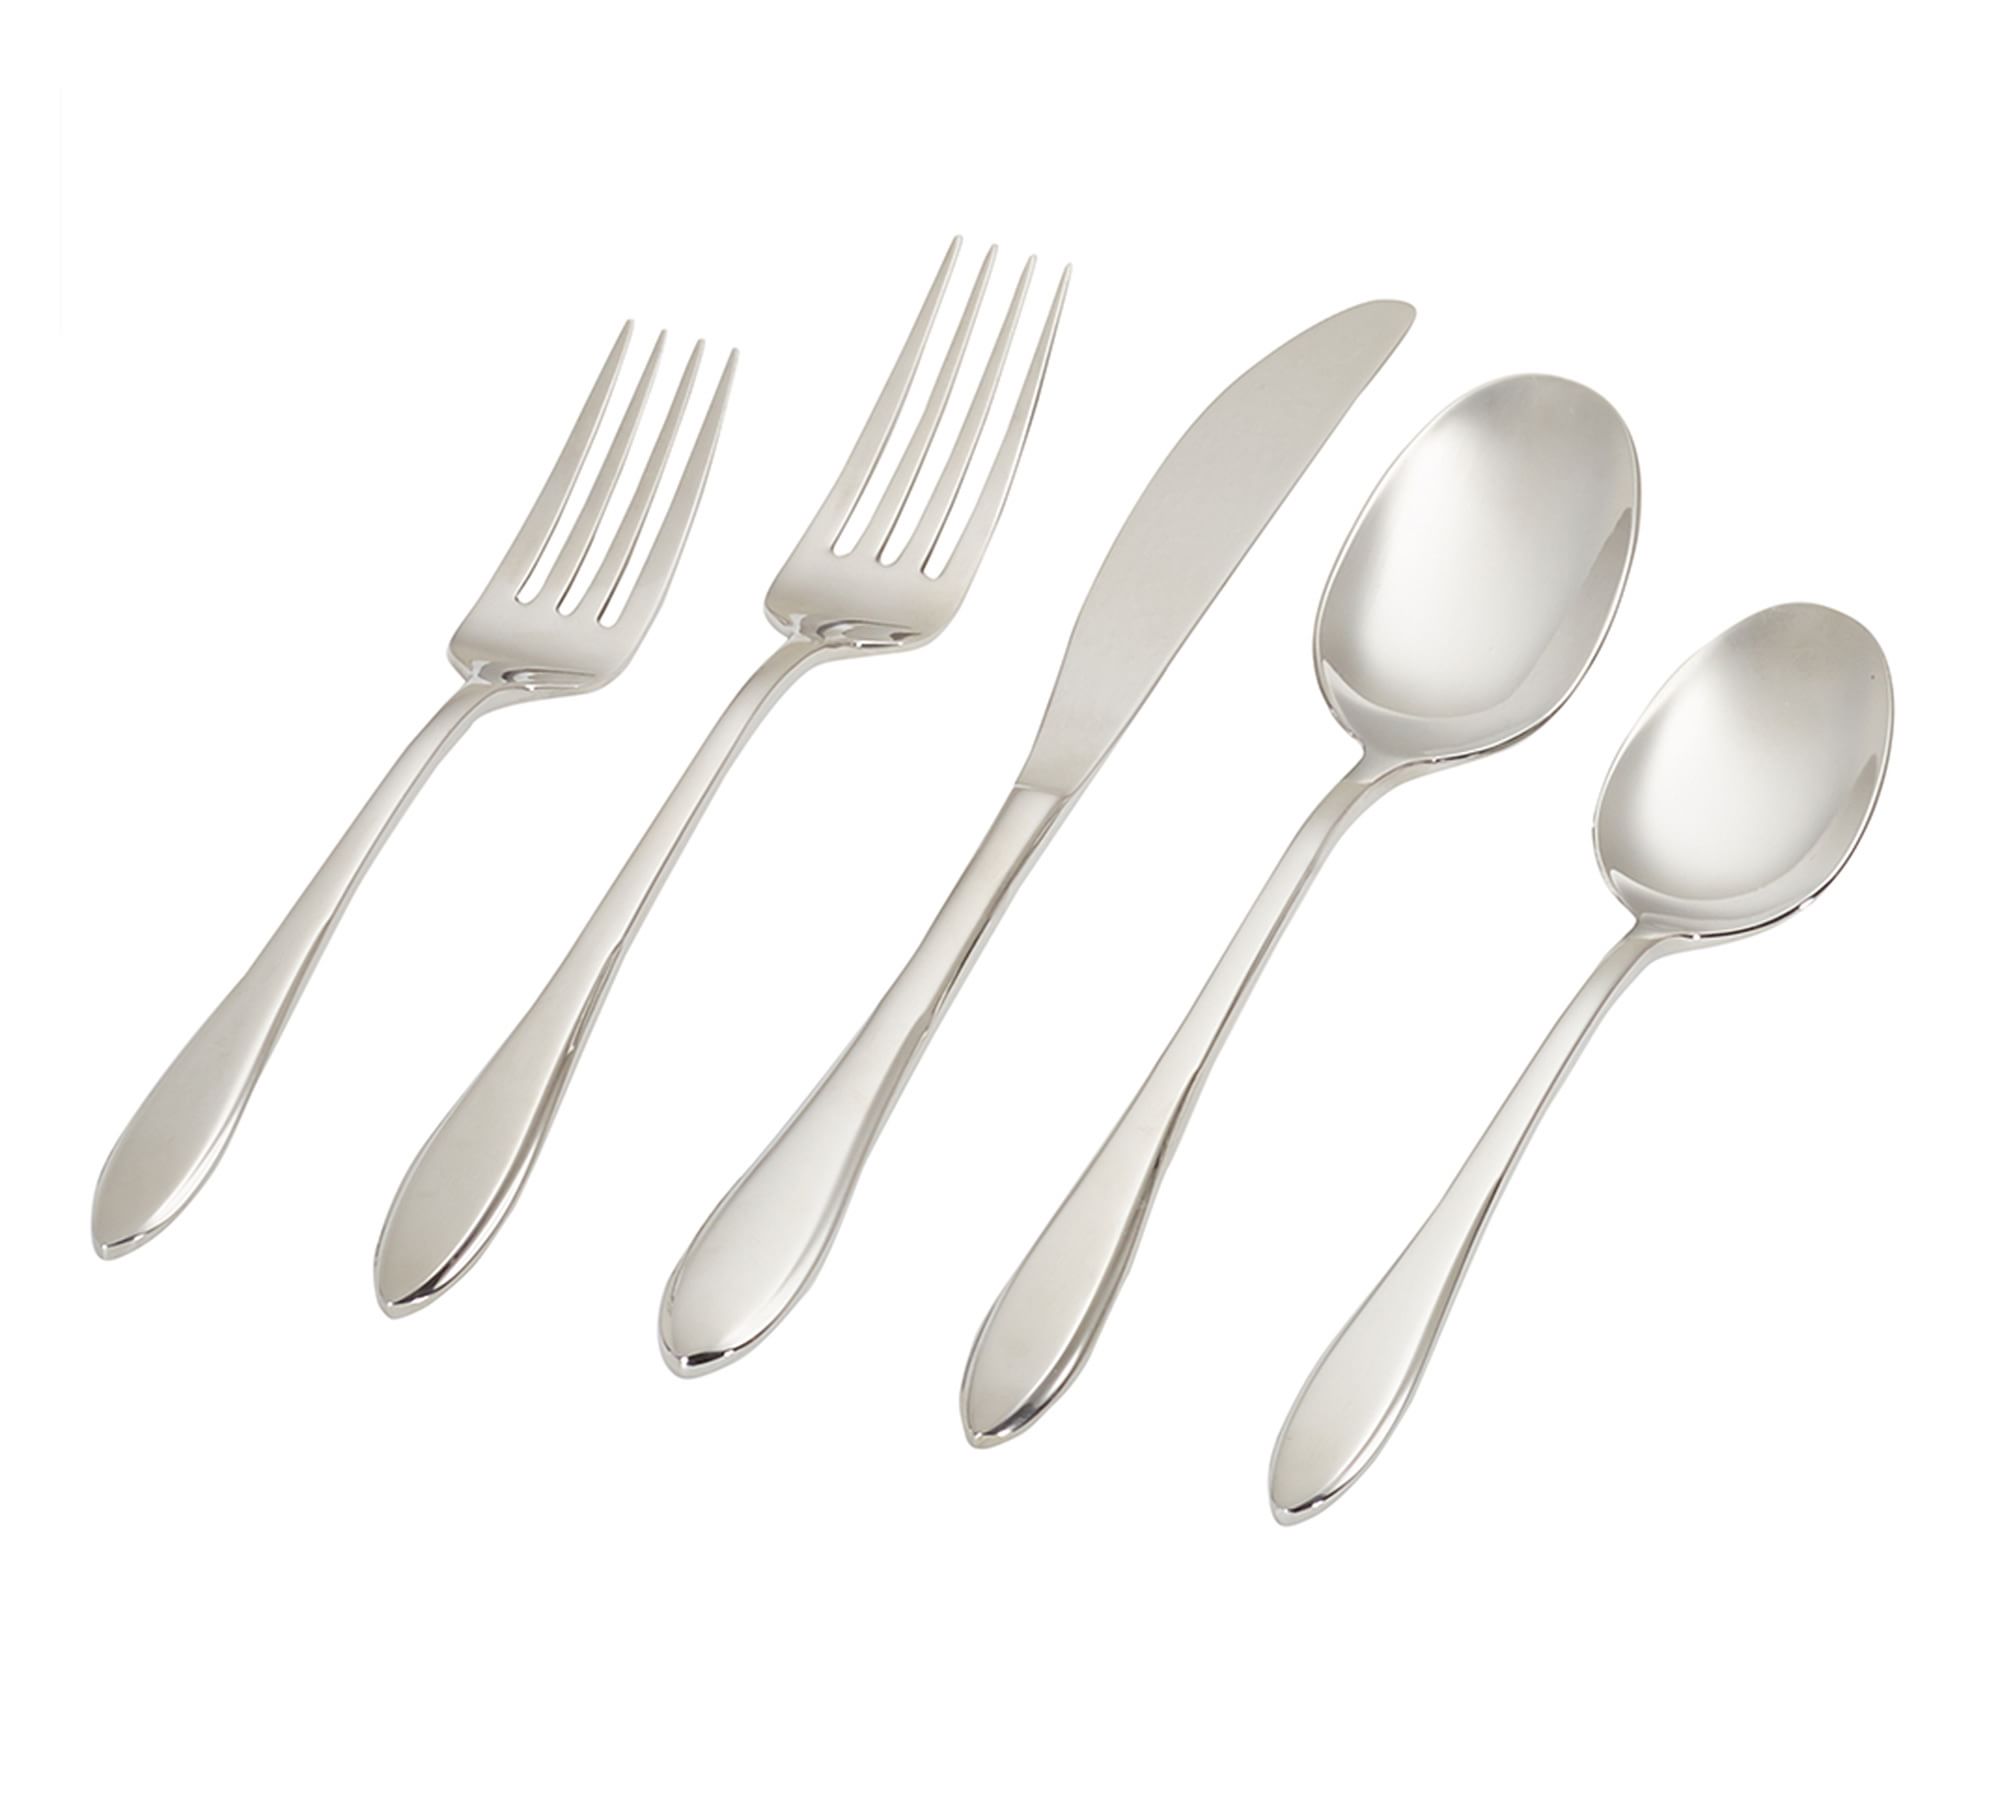 Peyton Curve Stainless Steel Flatware Sets